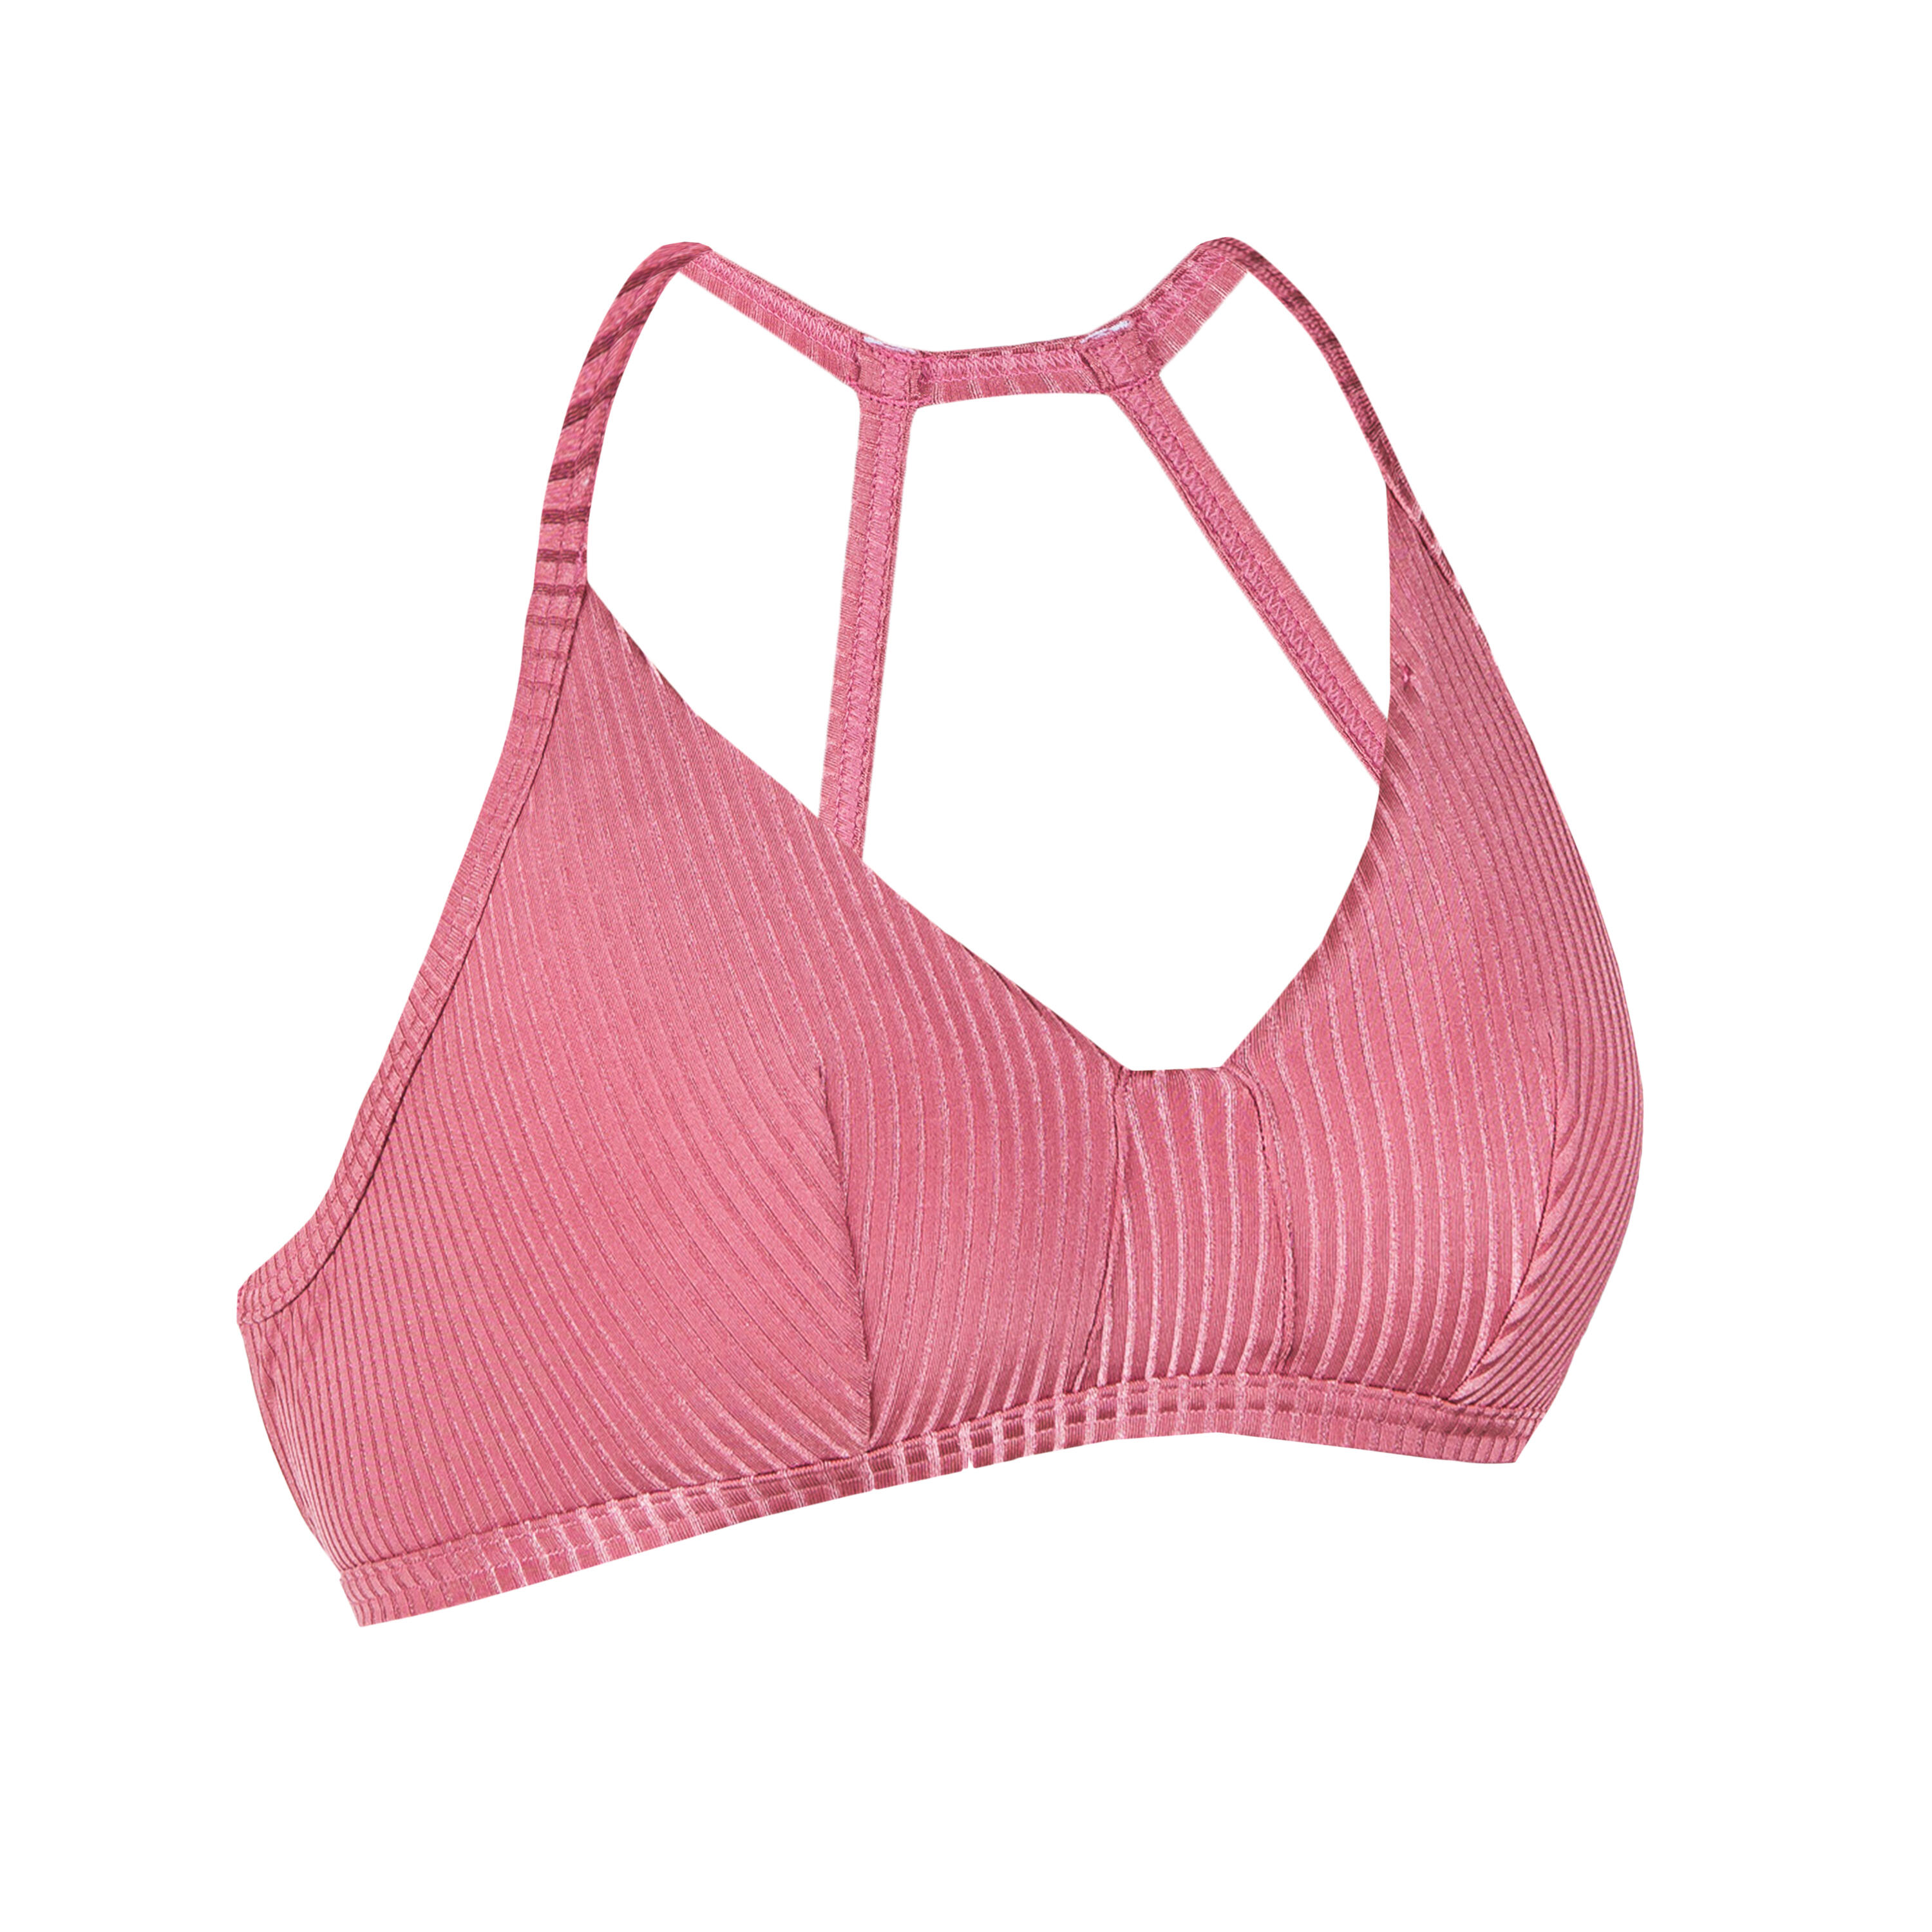 CROP TOP Swimsuit Top with Structured and Adjustable Back CARO - RIBBED PINK 3/13